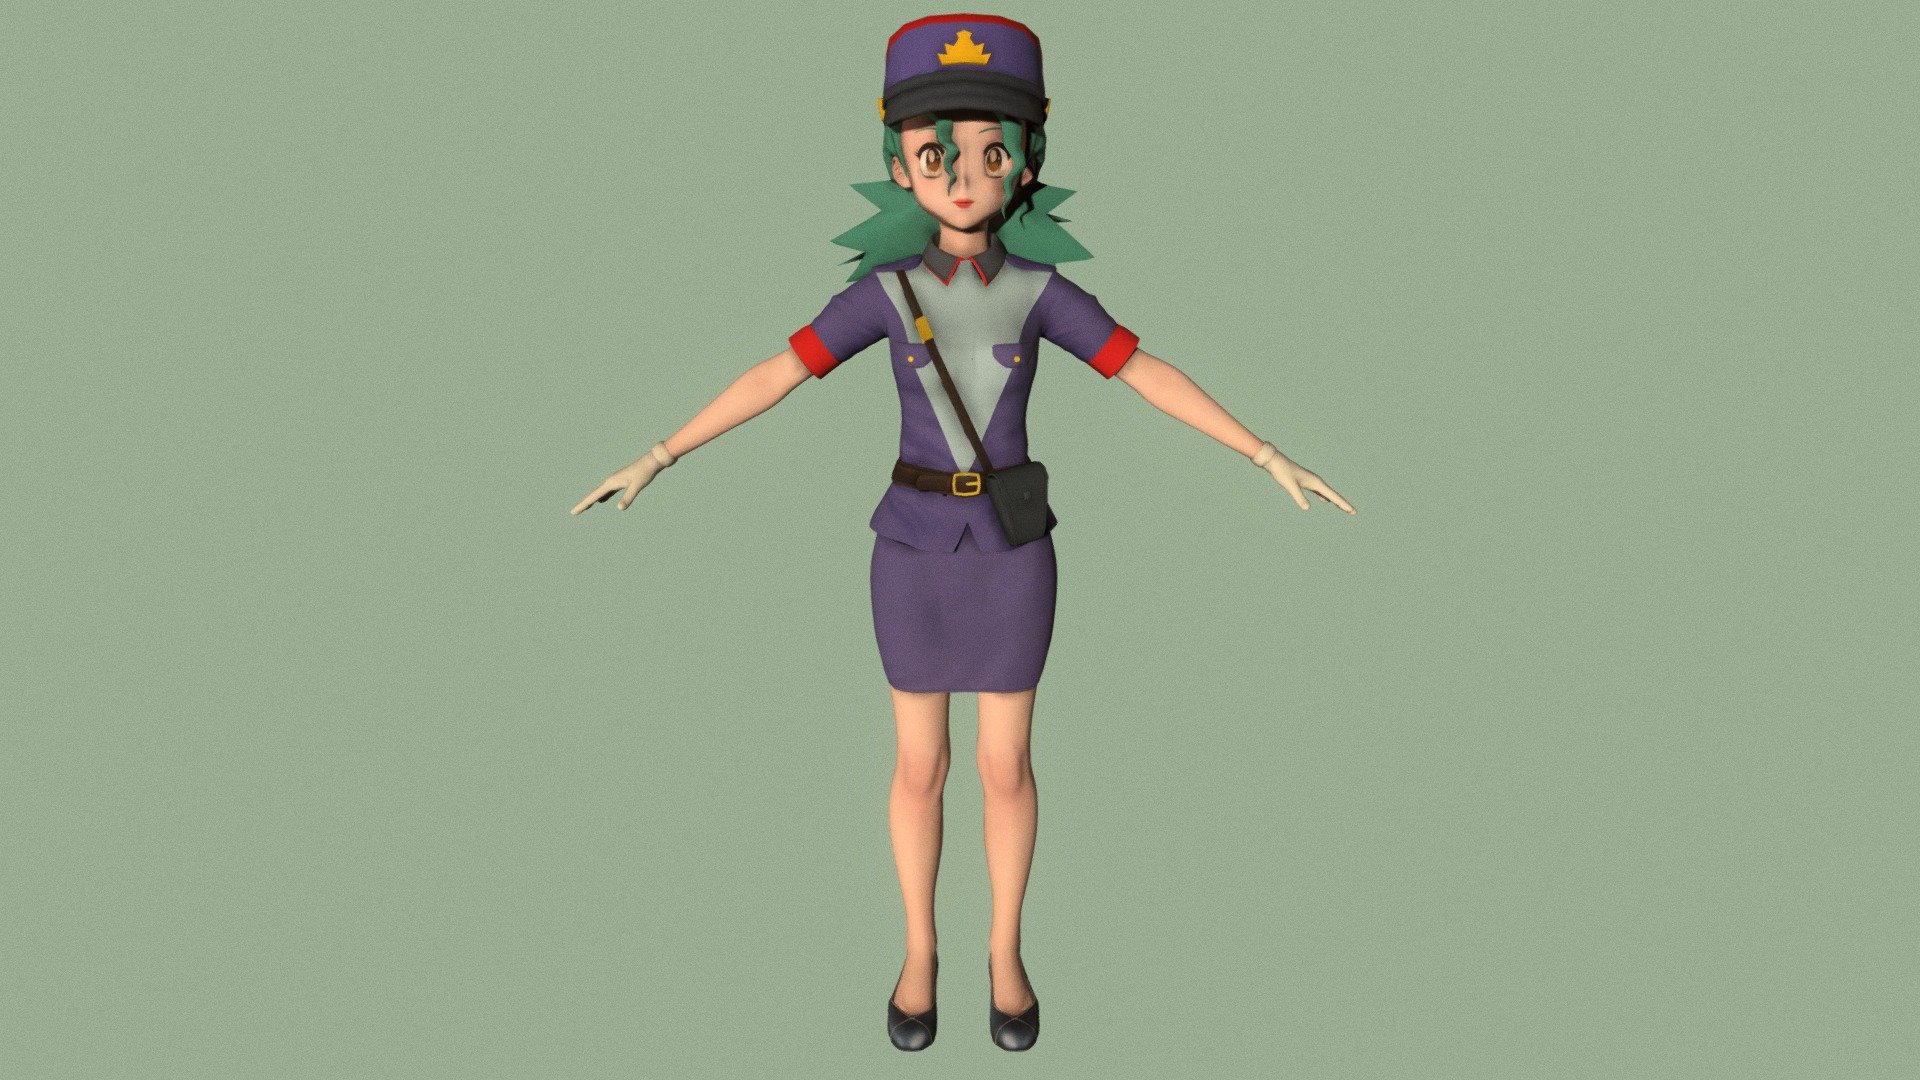 T-pose rigged model of anime girl Jenny (Pokemon).

Body and clothings are rigged and skinned by 3ds Max CAT system.

Eye direction and facial animation controlled by Morpher modifier / Shape Keys / Blendshape.

This product include .FBX (ver. 7200) and .MAX (ver. 2010) files.

3ds Max version is turbosmoothed to give a high quality render (as you can see here).

Original main body mesh have ~7.000 polys.

This 3D model may need some tweaking to adapt the rig system to games engine and other platforms.

I support convert model to various file formats (the rig data will be lost in this process): 3DS; AI; ASE; DAE; DWF; DWG; DXF; FLT; HTR; IGS; M3G; MQO; OBJ; SAT; STL; W3D; WRL; X.

You can buy all of my models in one pack to save cost: https://sketchfab.com/3d-models/all-of-my-anime-girls-c5a56156994e4193b9e8fa21a3b8360b

And I can make commission models.

If you have any questions, please leave a comment or contact me via my email 3d.eden.project@gmail.com 3d model